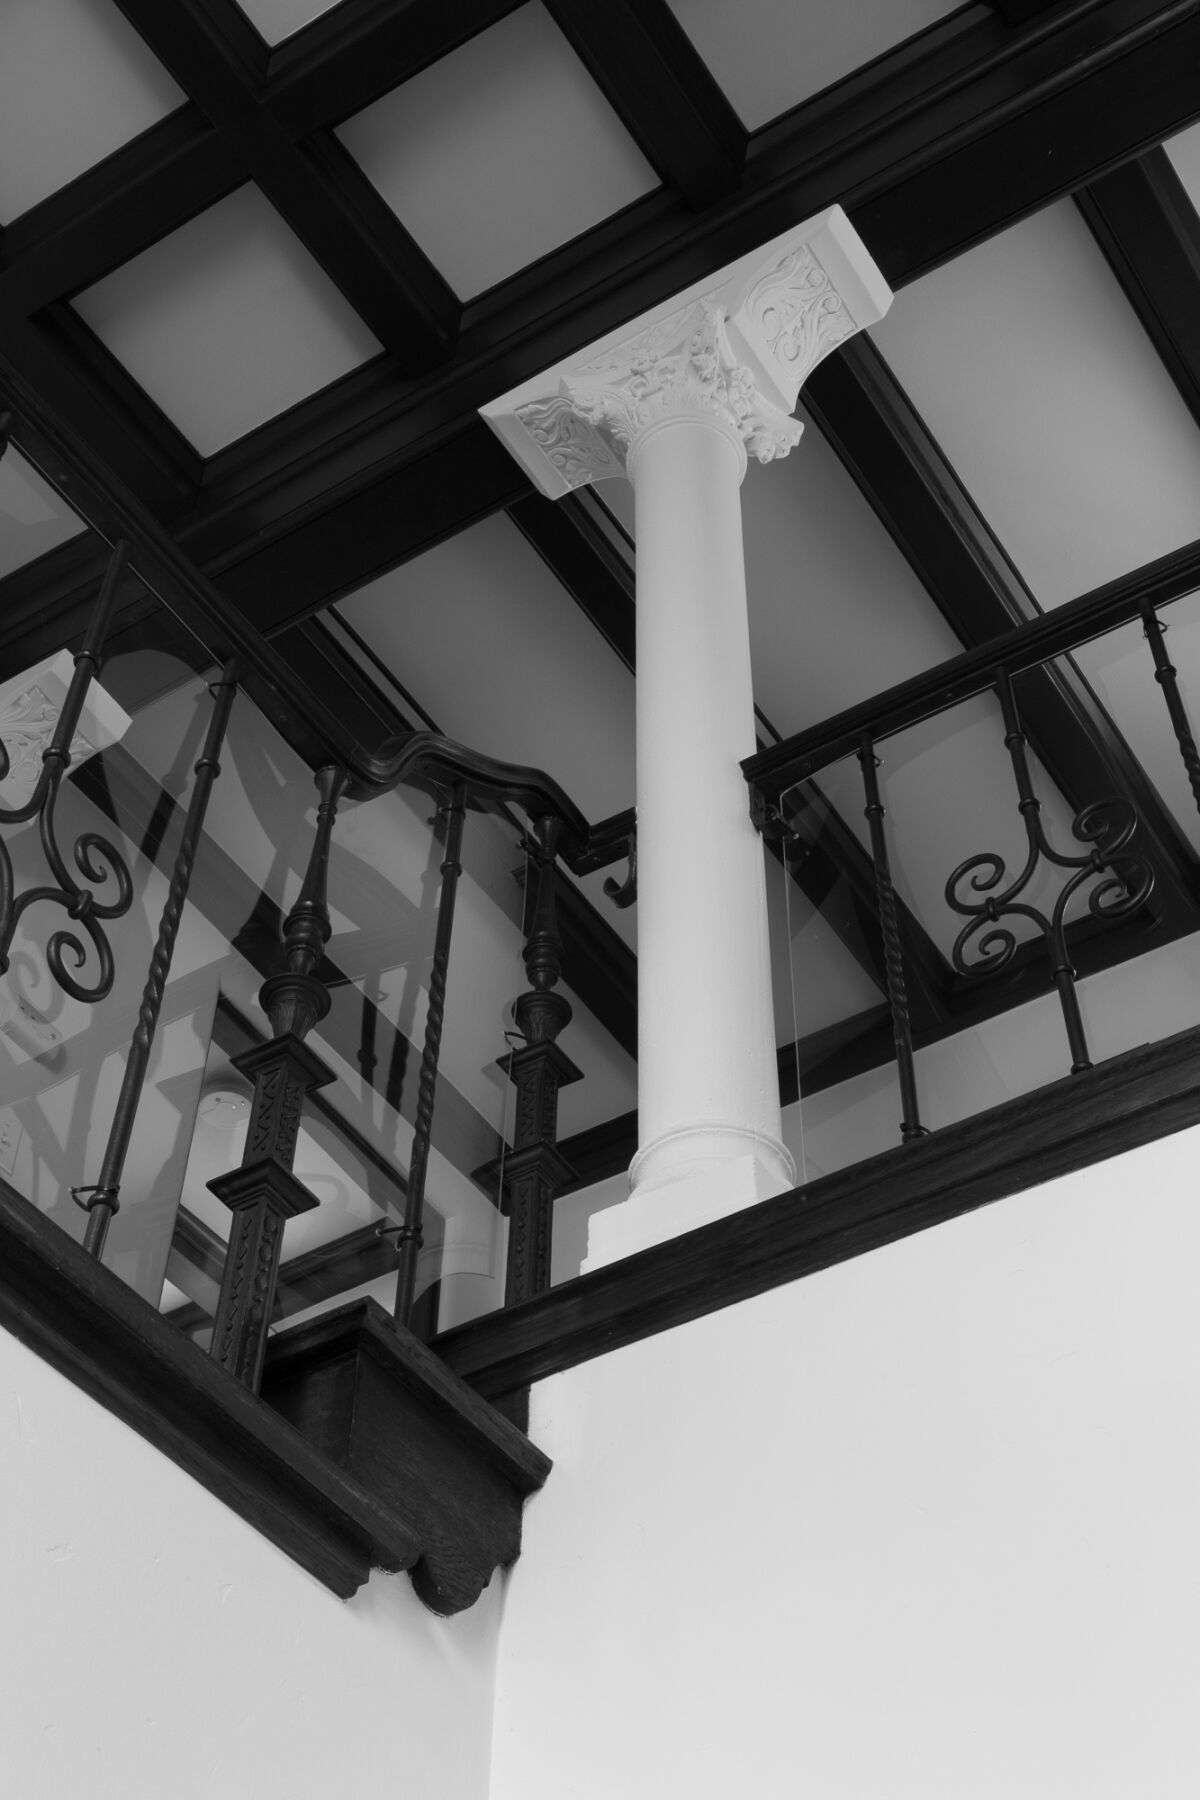 A black and white image shows a Corinthian column extending into a wood beam ceiling